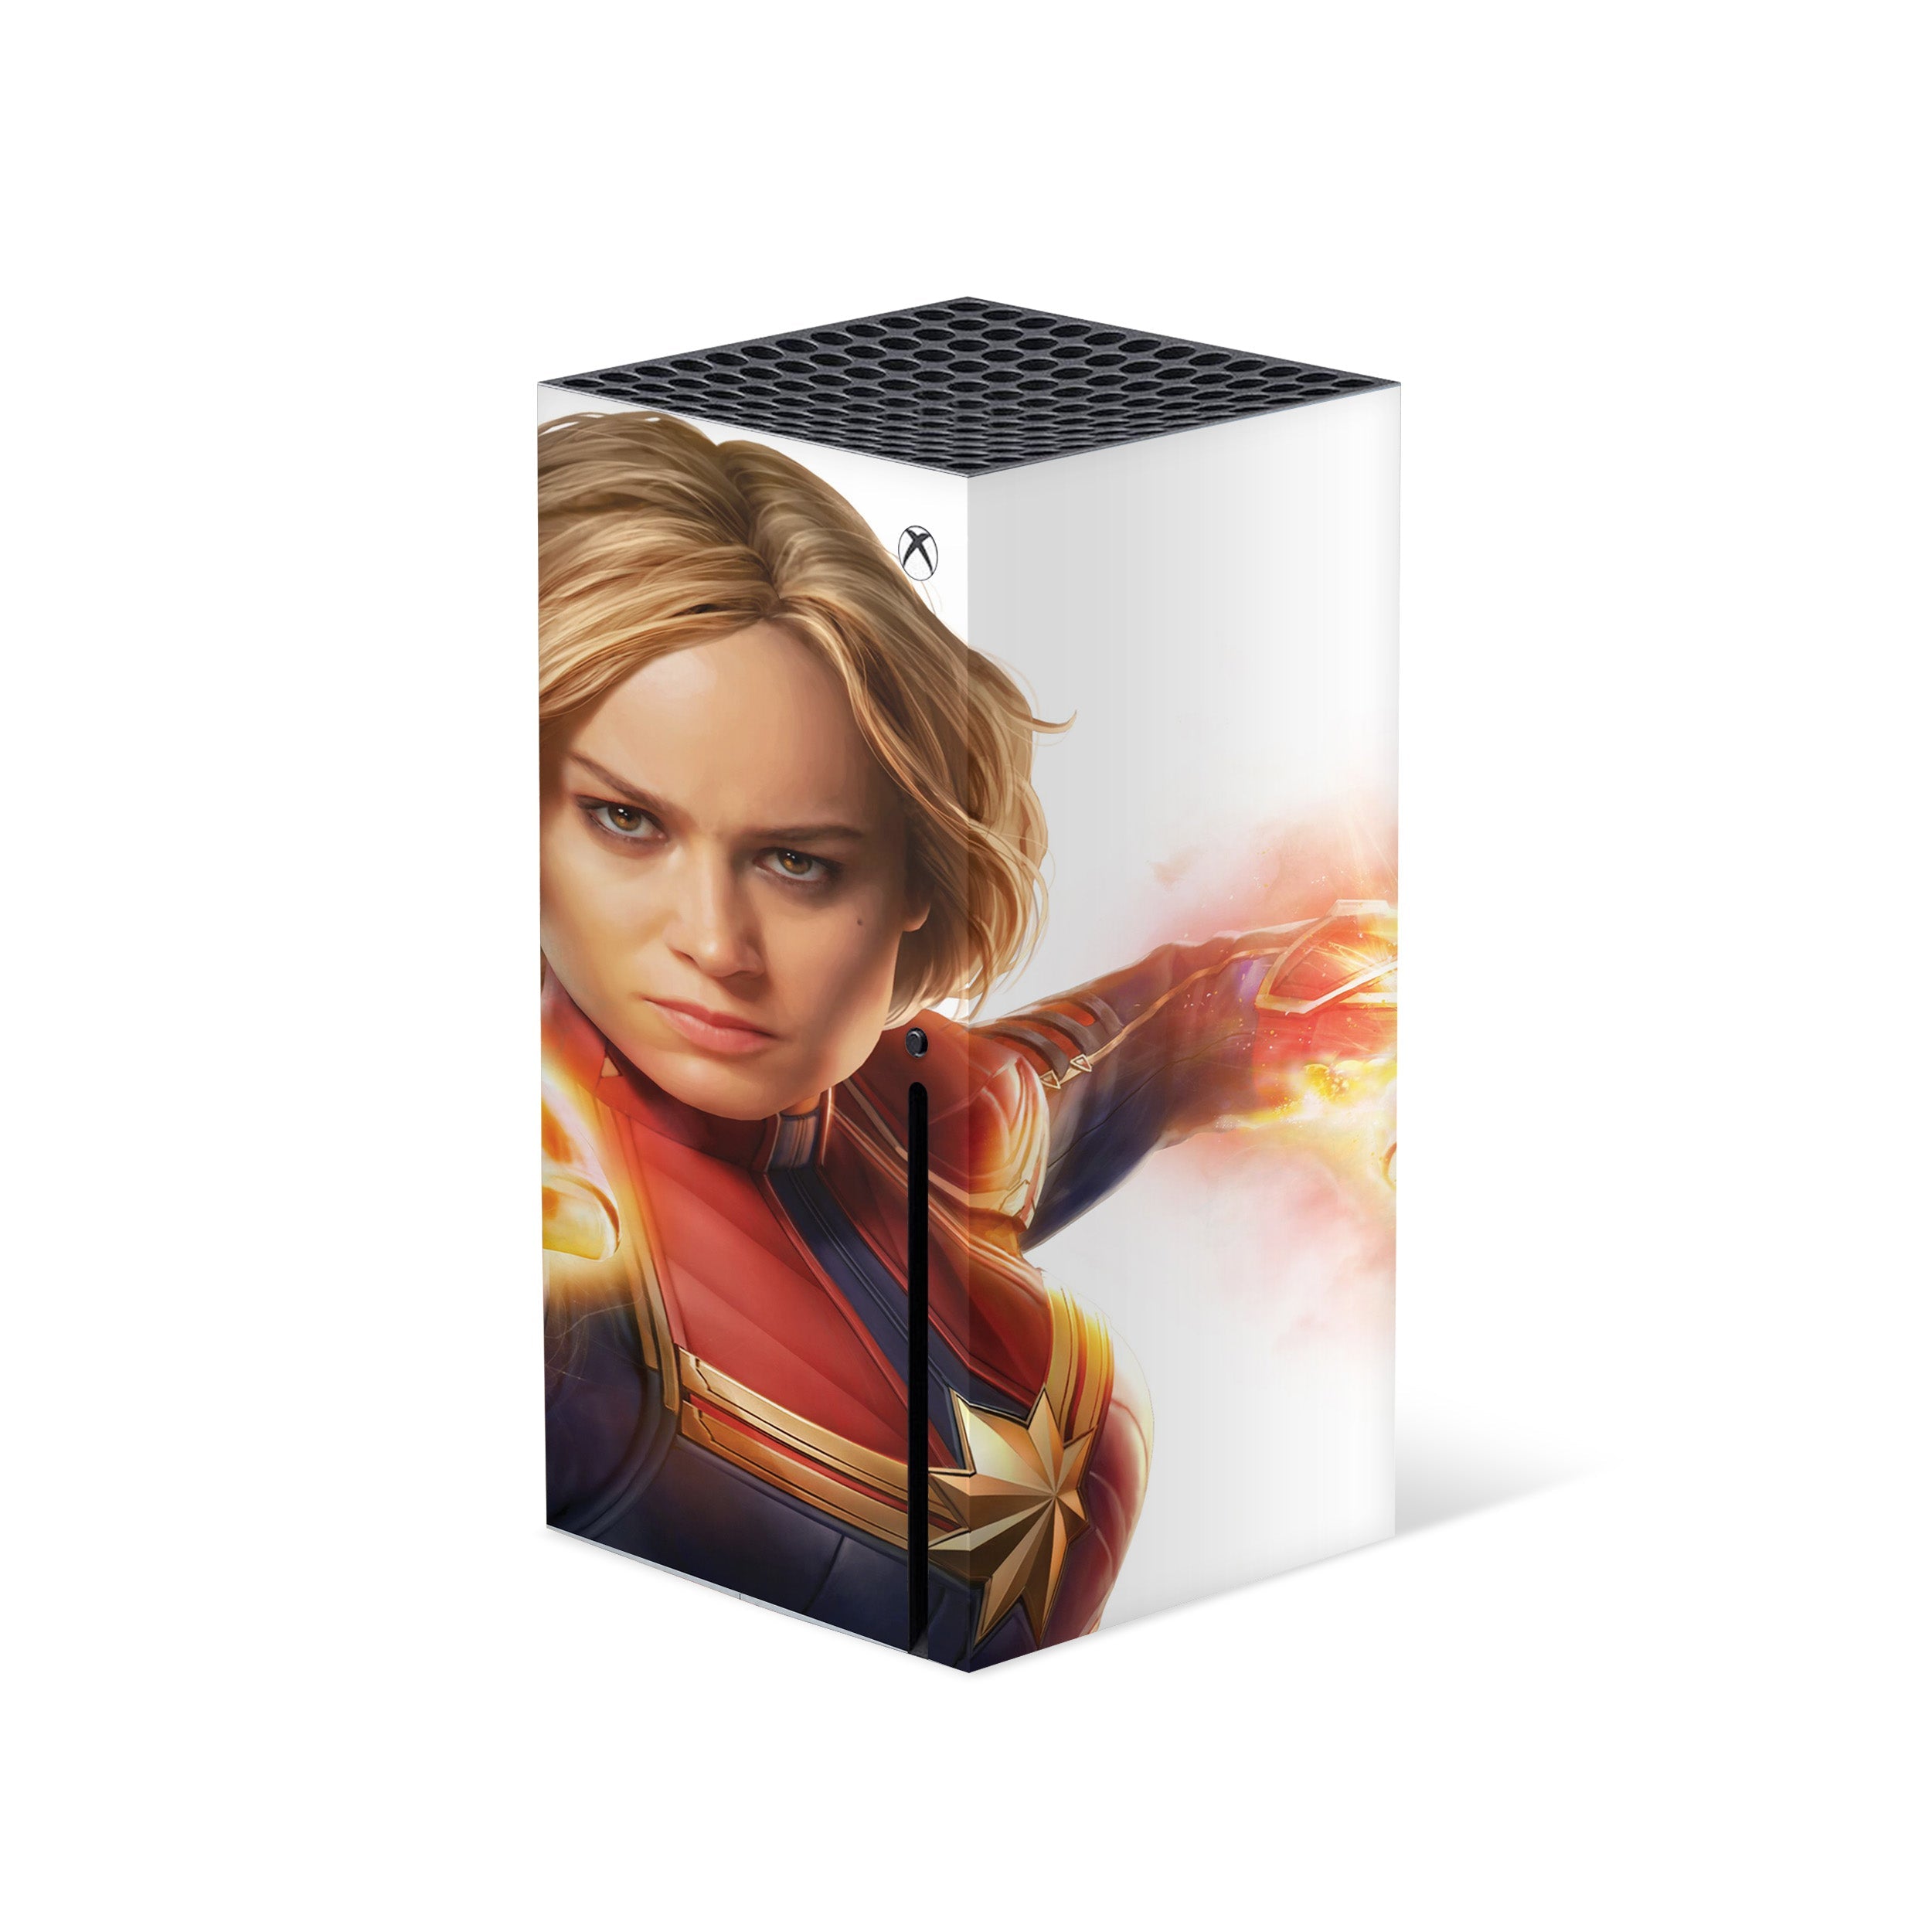 A video game skin featuring a Marvel Captain Marvel design for the Xbox Series X.